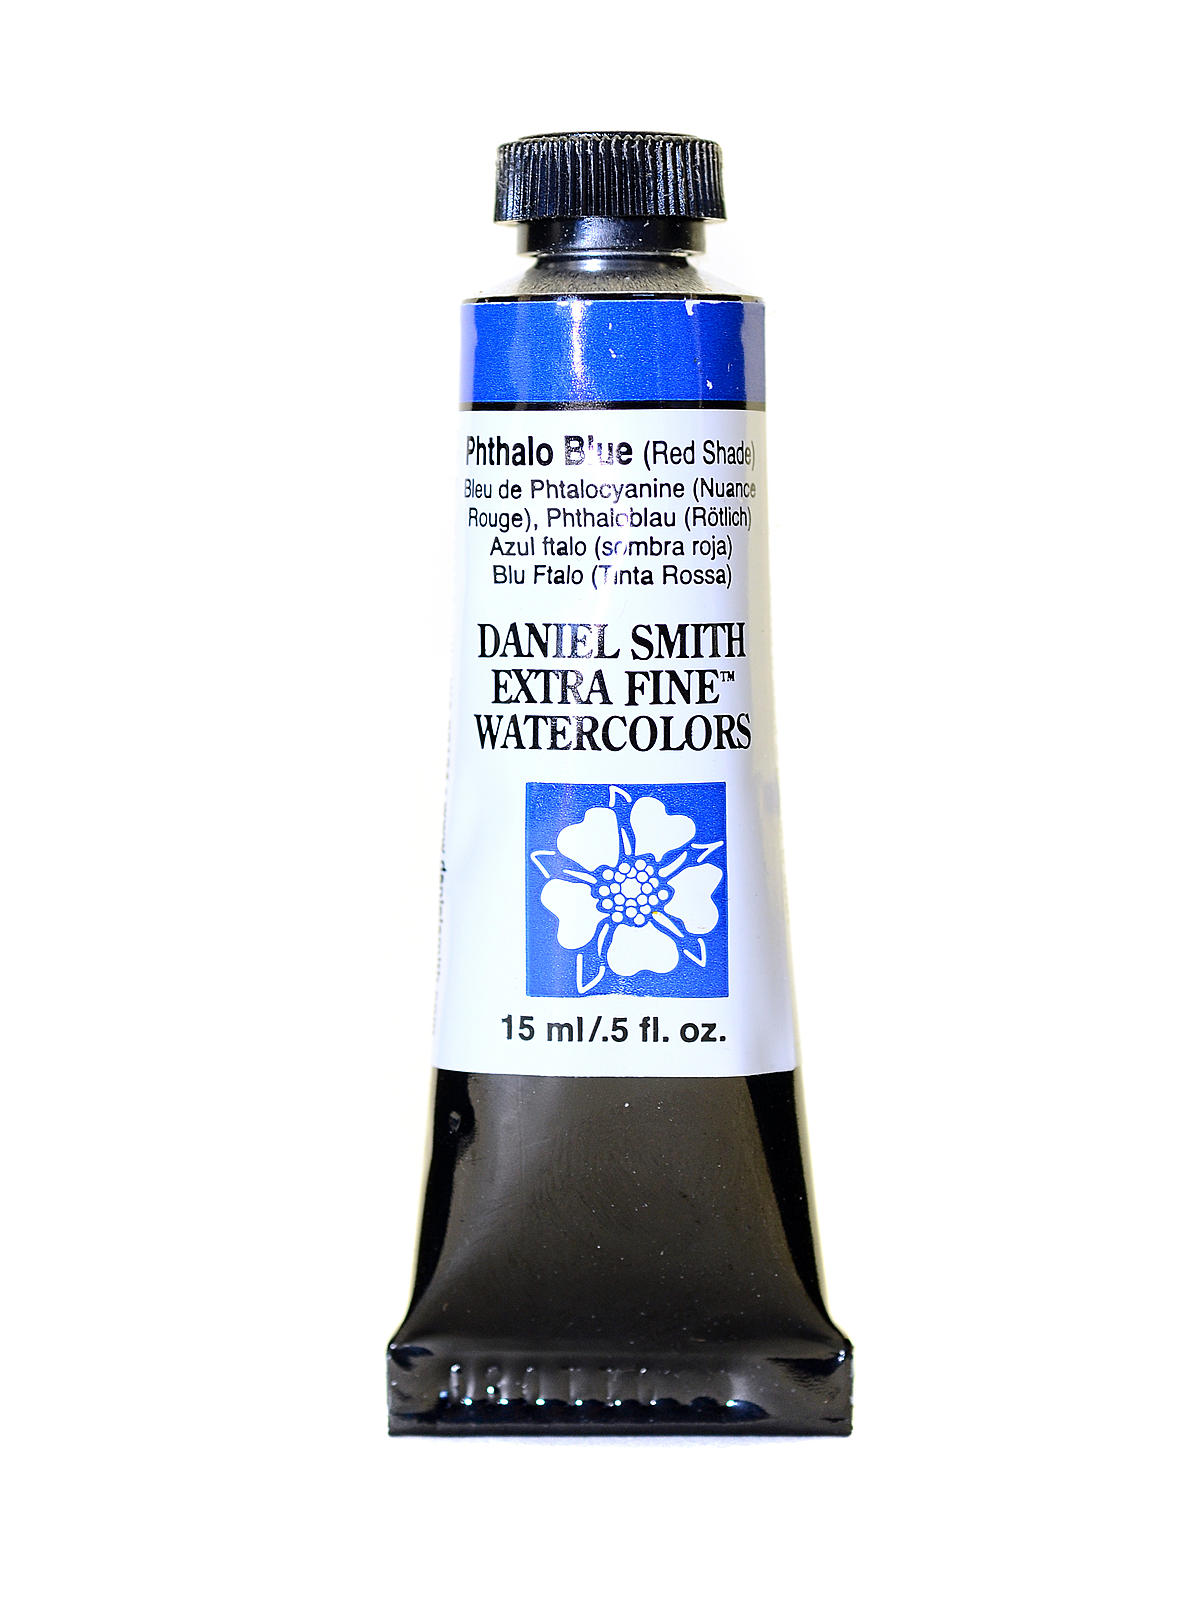 Extra Fine Watercolors Phthalo Blue Red Shade 15 Ml